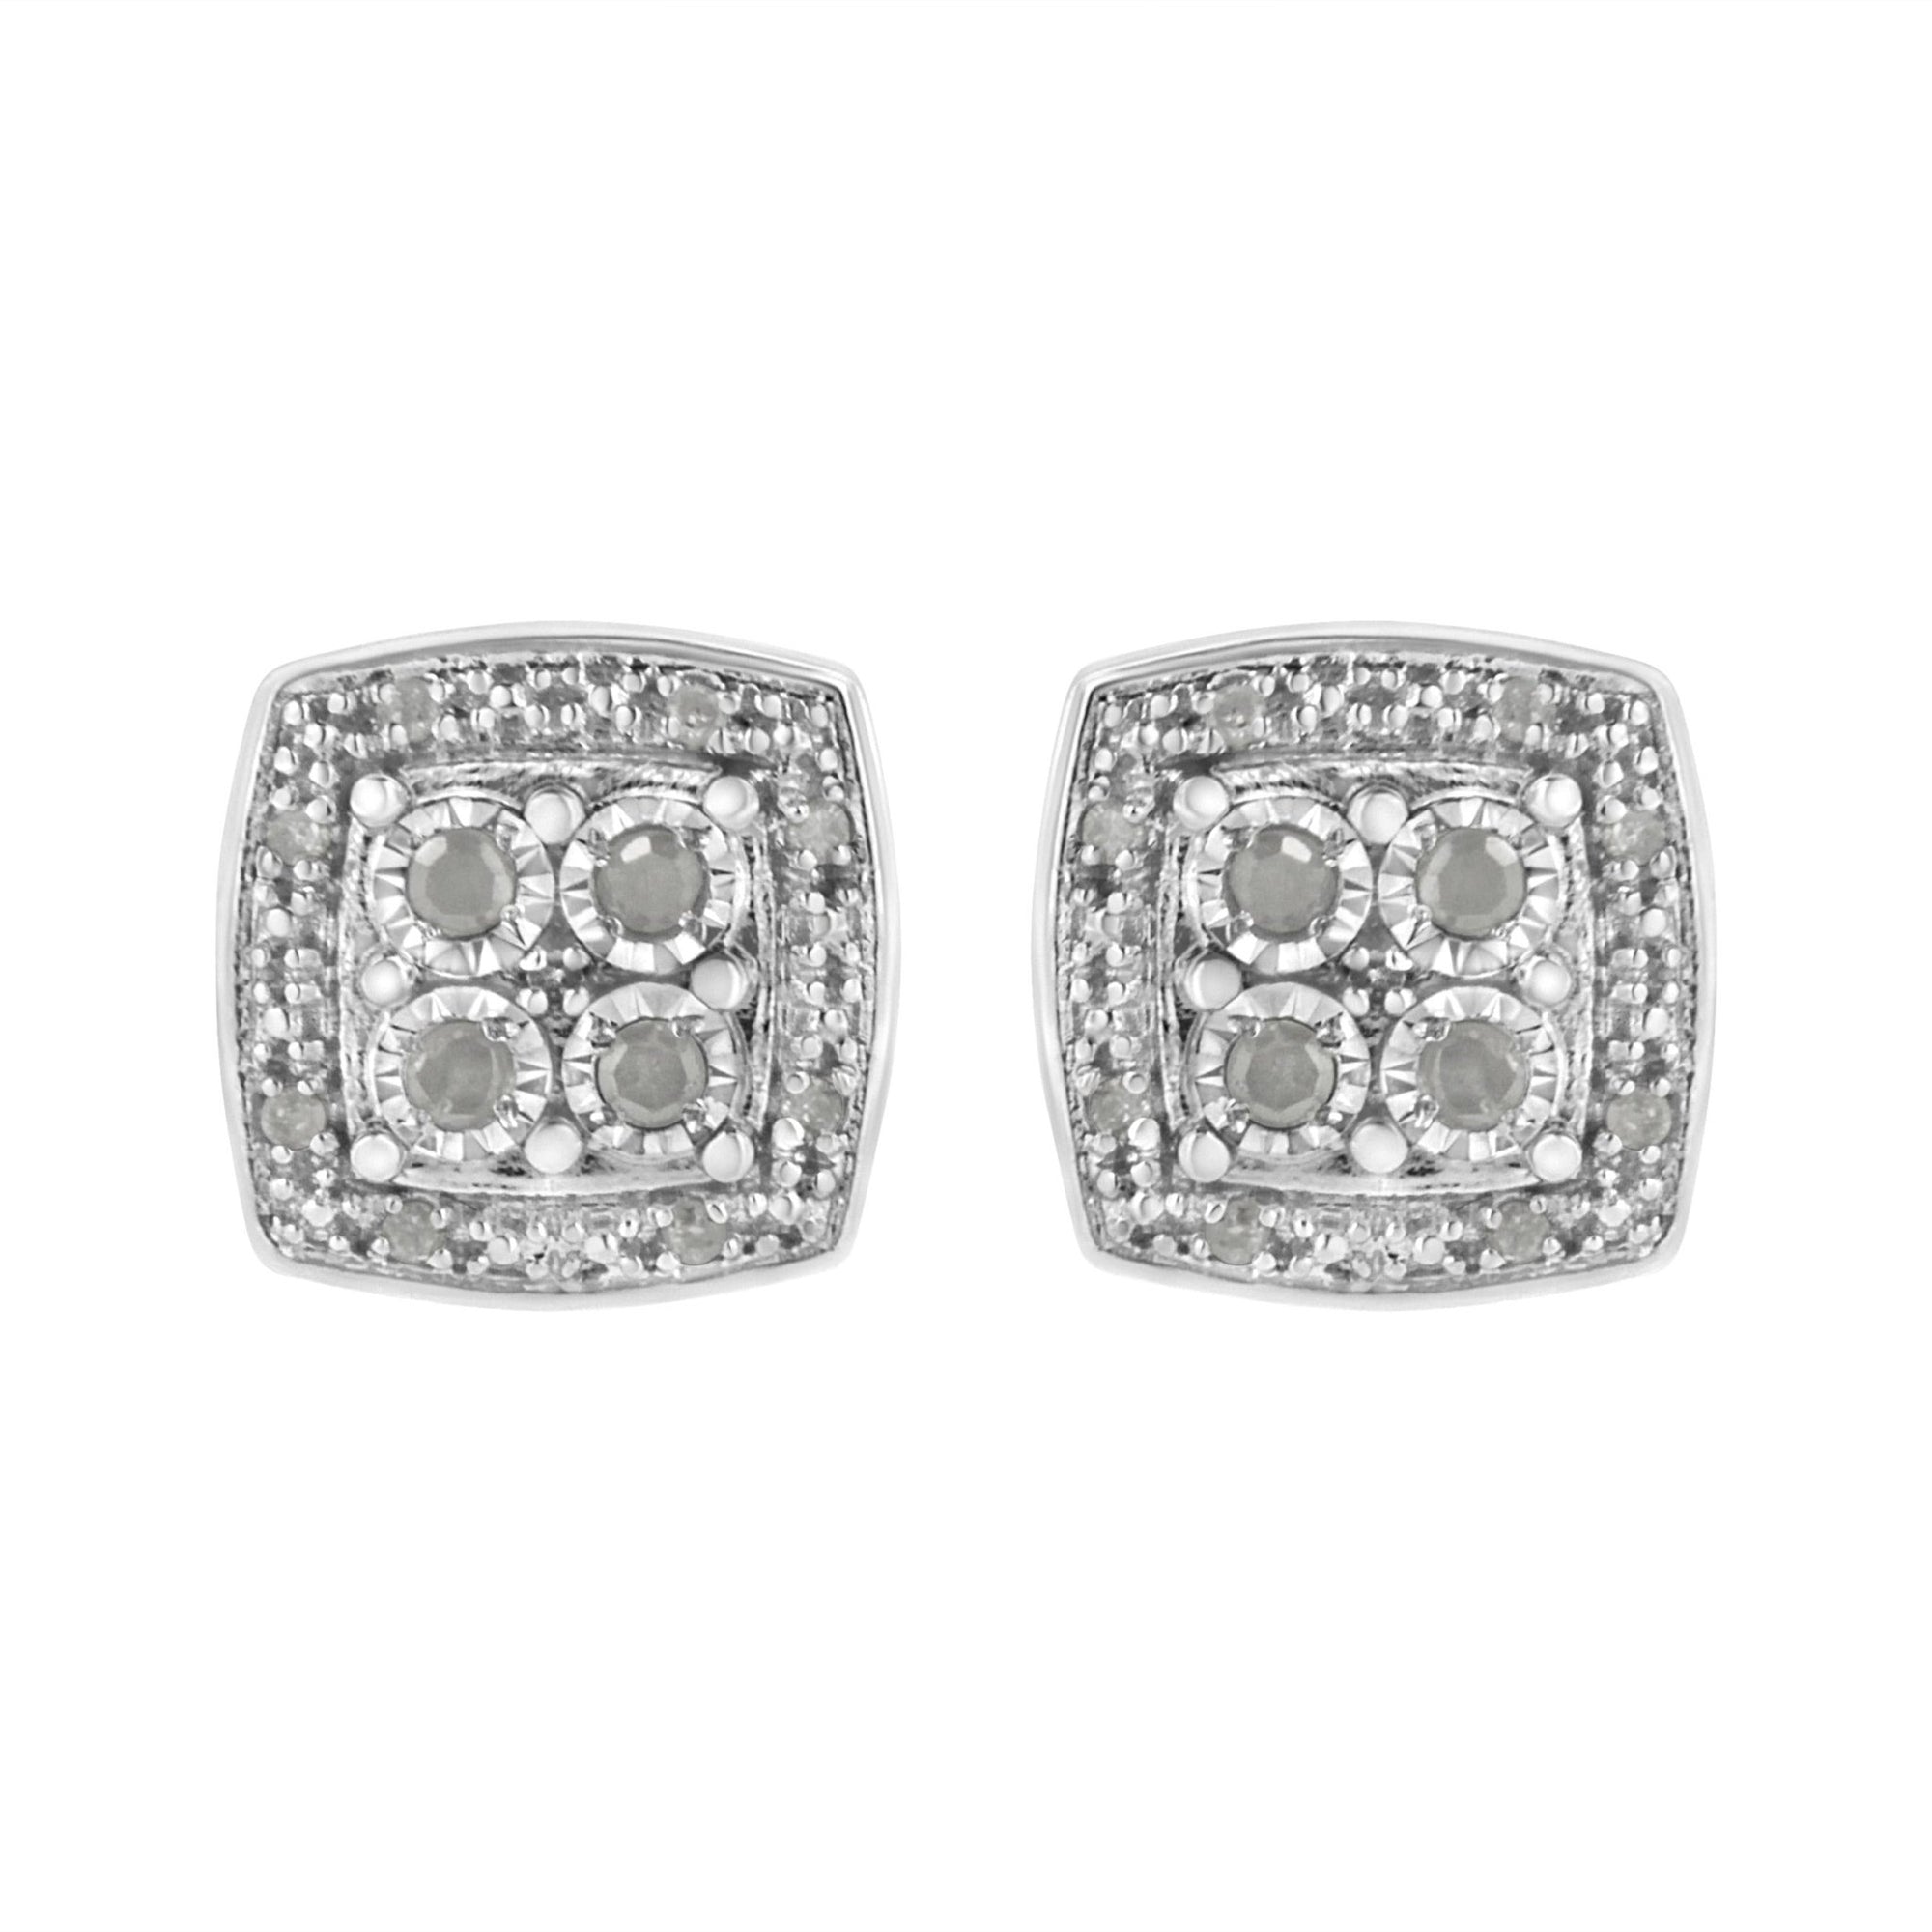 .925 Sterling Silver 1/4 cttw Round Cut Diamond Square Shape Milgrain Stud Earrings (I-J Color, I3 Clarity) - LinkagejewelrydesignLinkagejewelrydesign